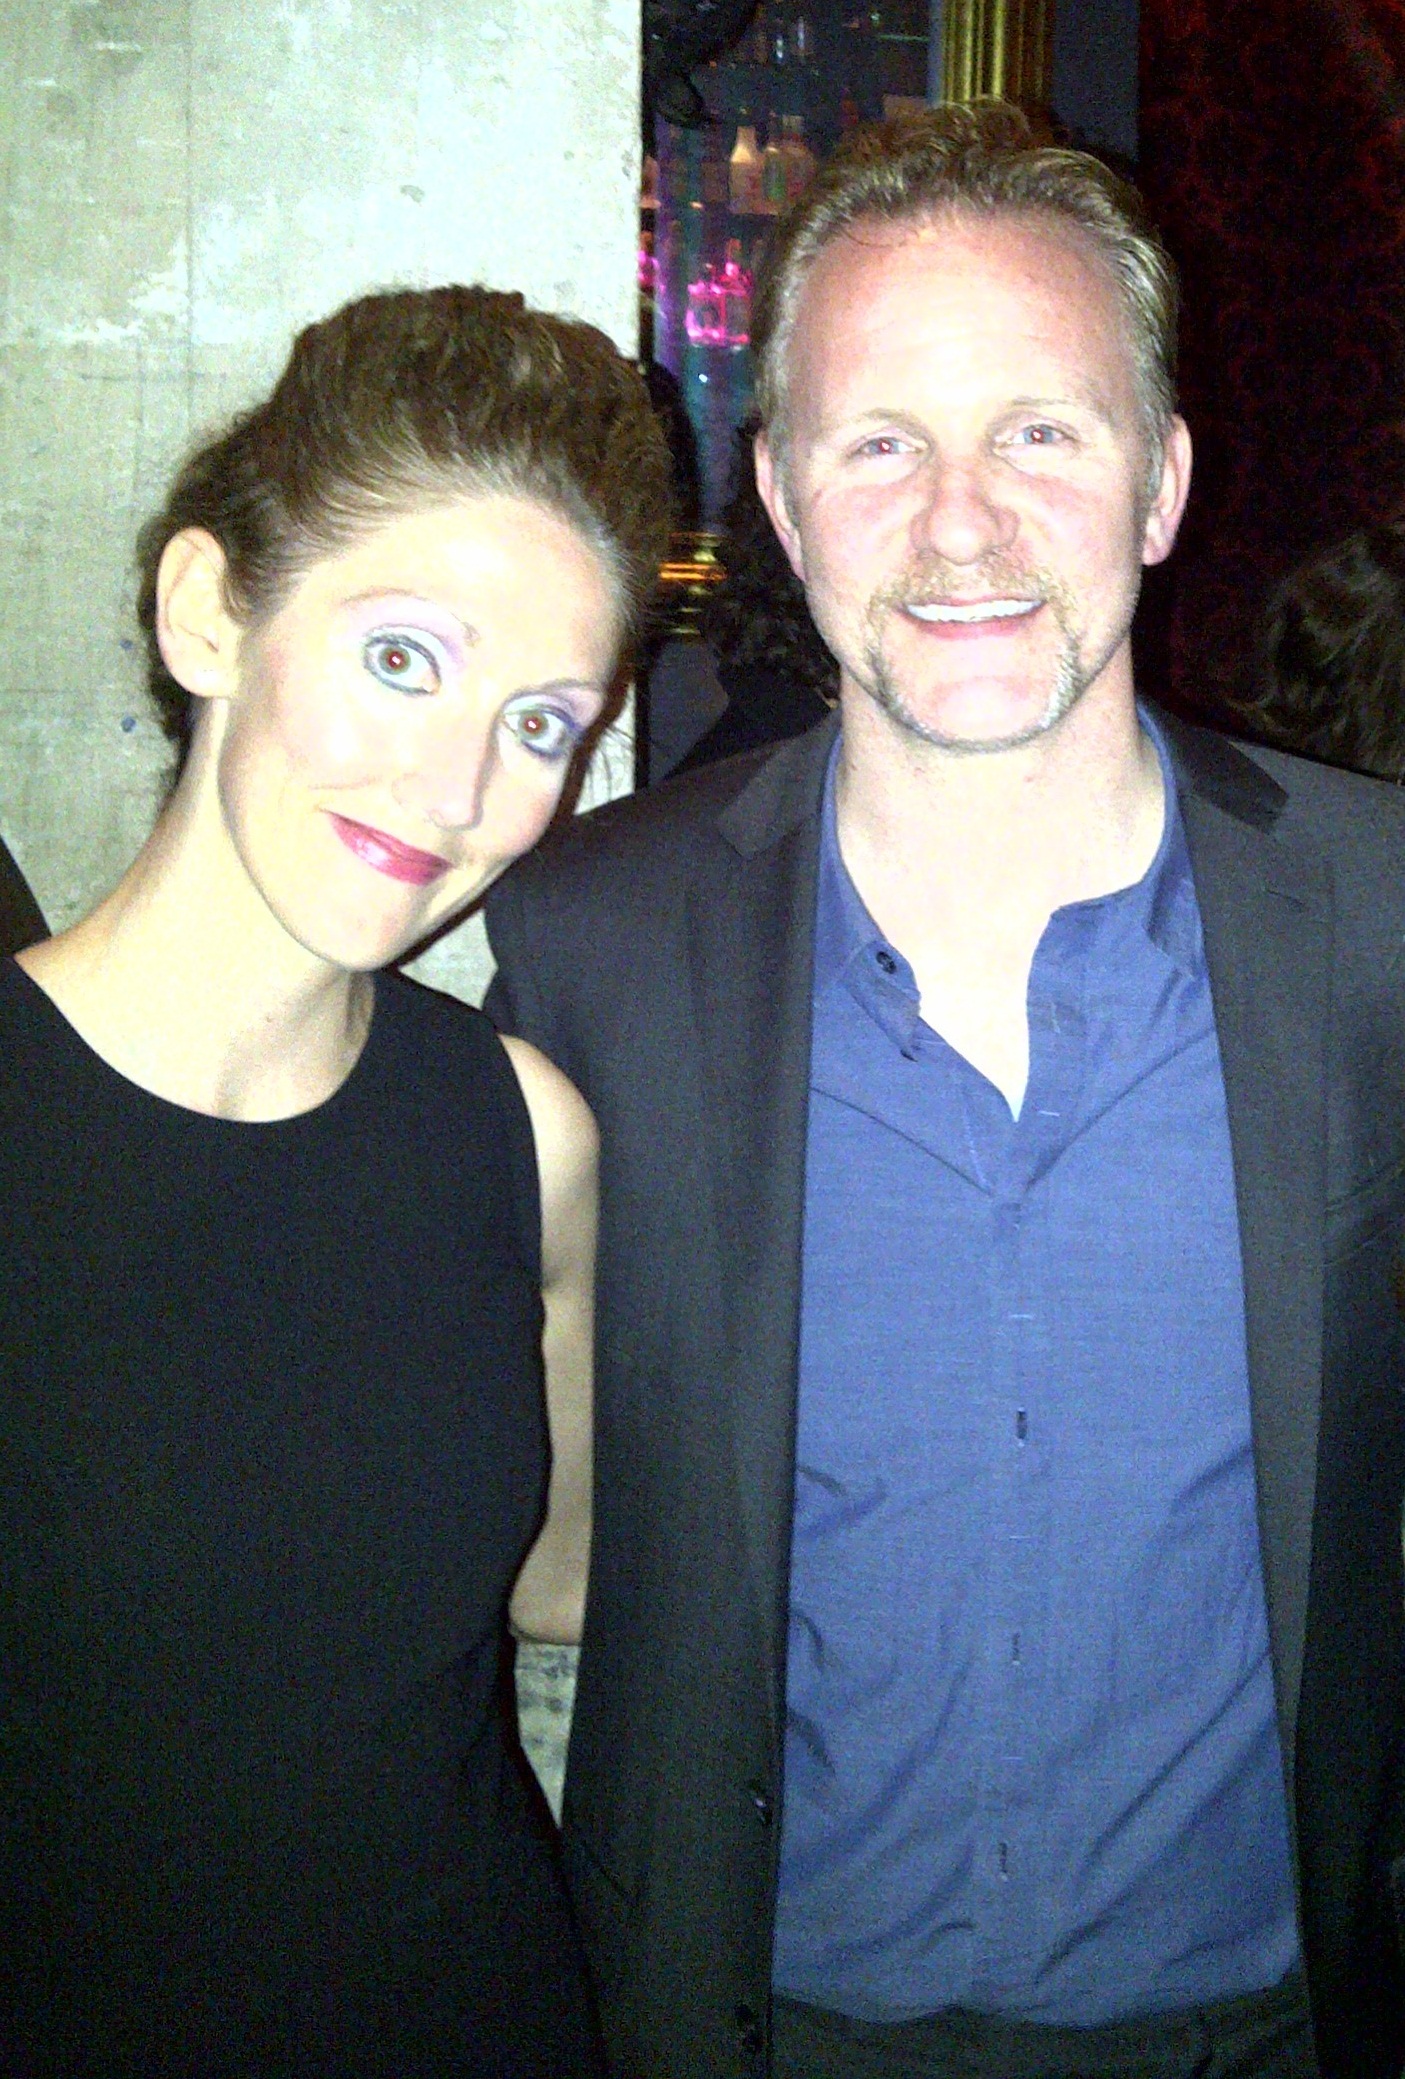 Actress Charlotte Milchard and Morgan Spurlock at the Afterparty of the 'Comic-Con Episode IV: A Fan's Hope' Premiere in Hollywood.